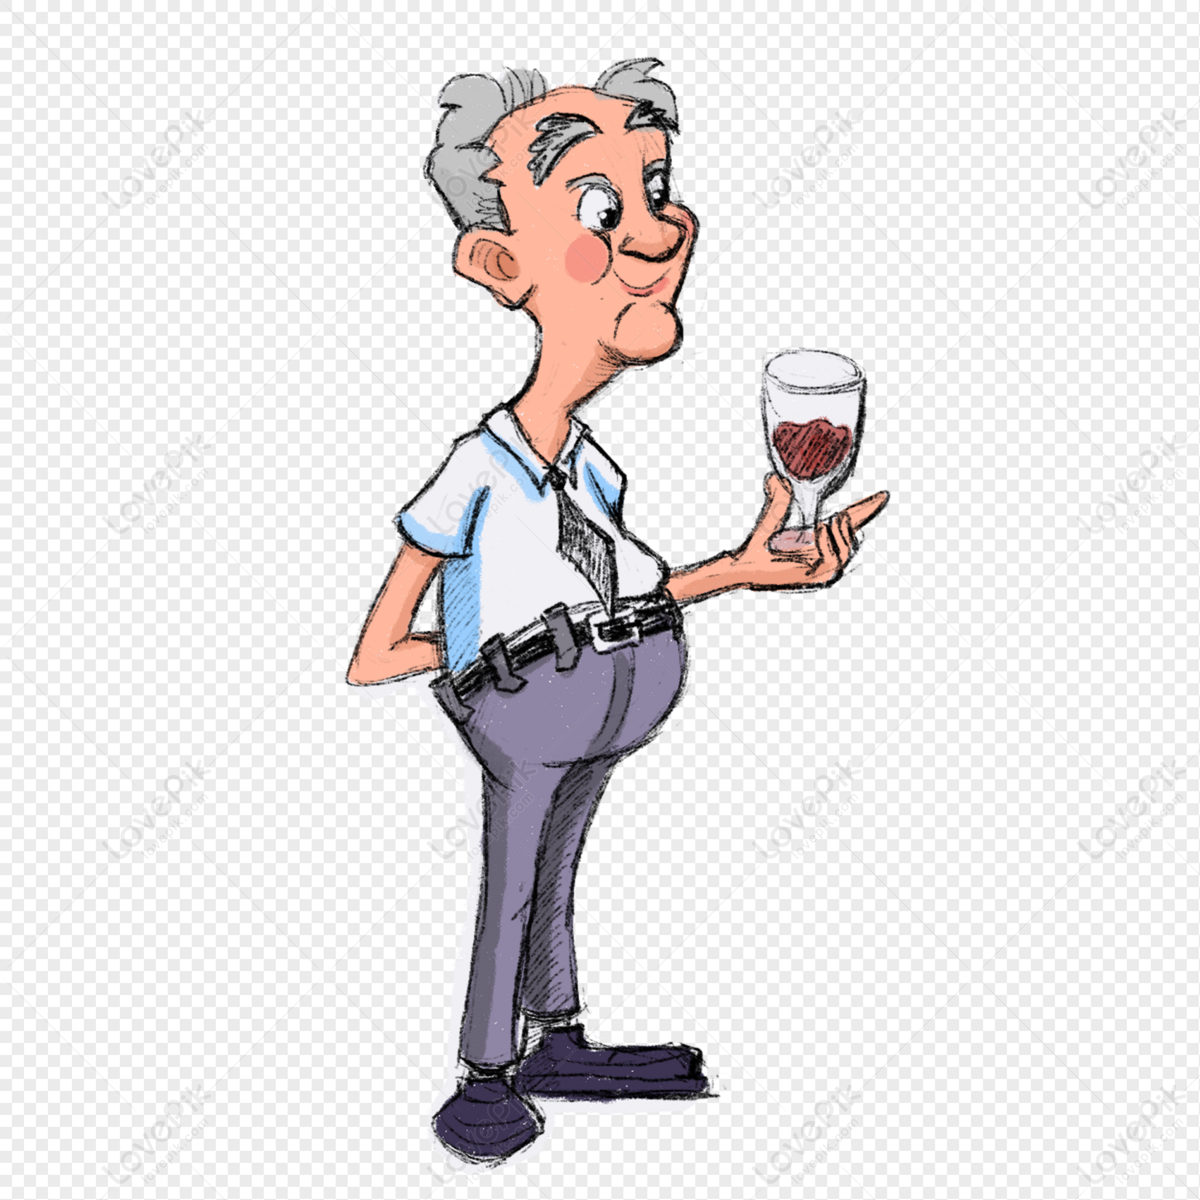 Drinking Red Wine PNG Hd Transparent Image And Clipart Image For Free  Download - Lovepik | 401605024